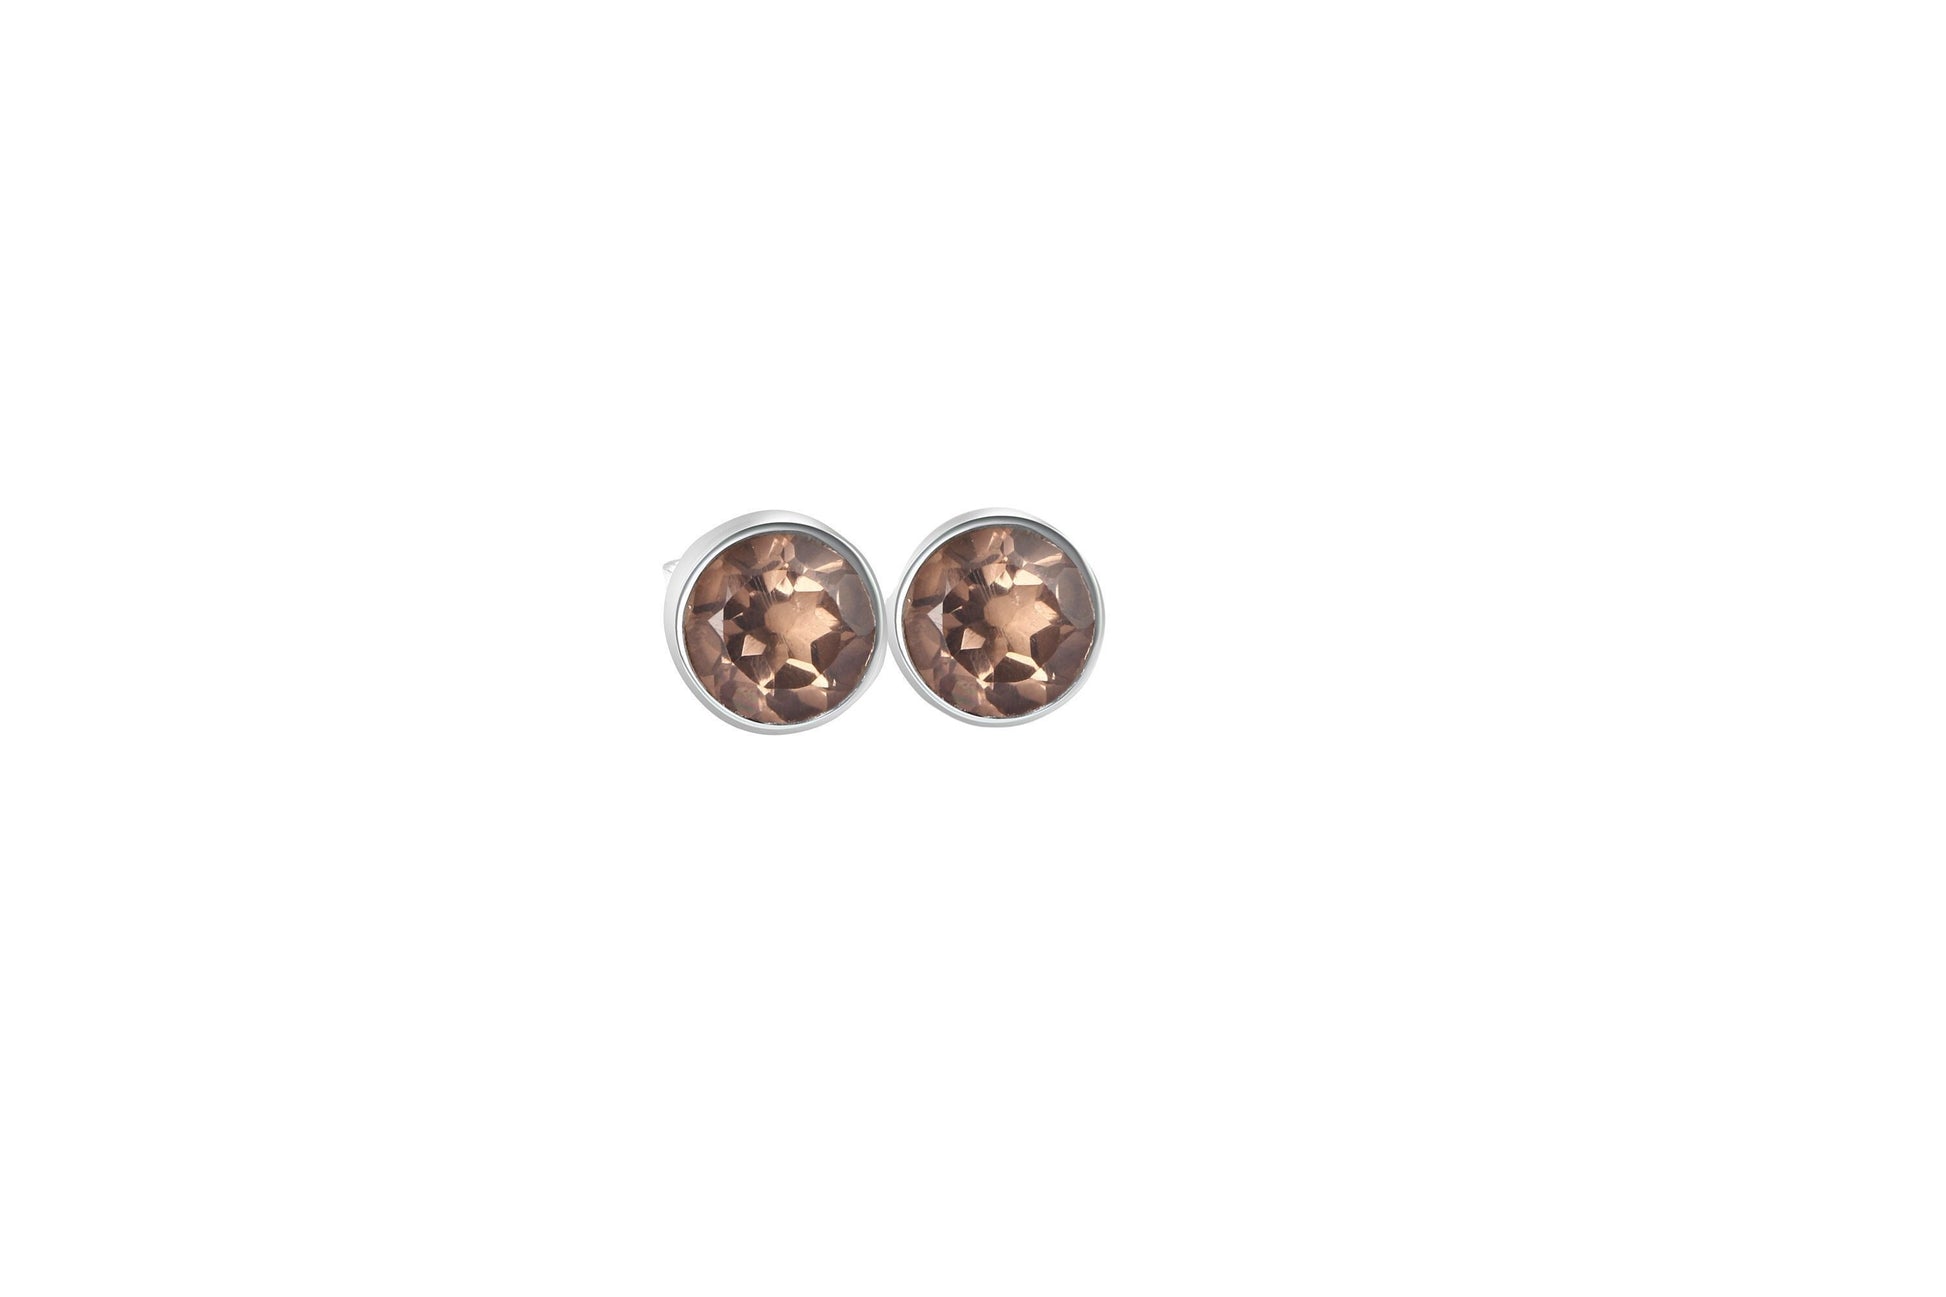 Round shaped natural brown smoky QUARTZ GEMS 925 Sterling SILVER Stud Earrings, Minimalist design, brown gems stud earrings, Australia, Zorbajewellers